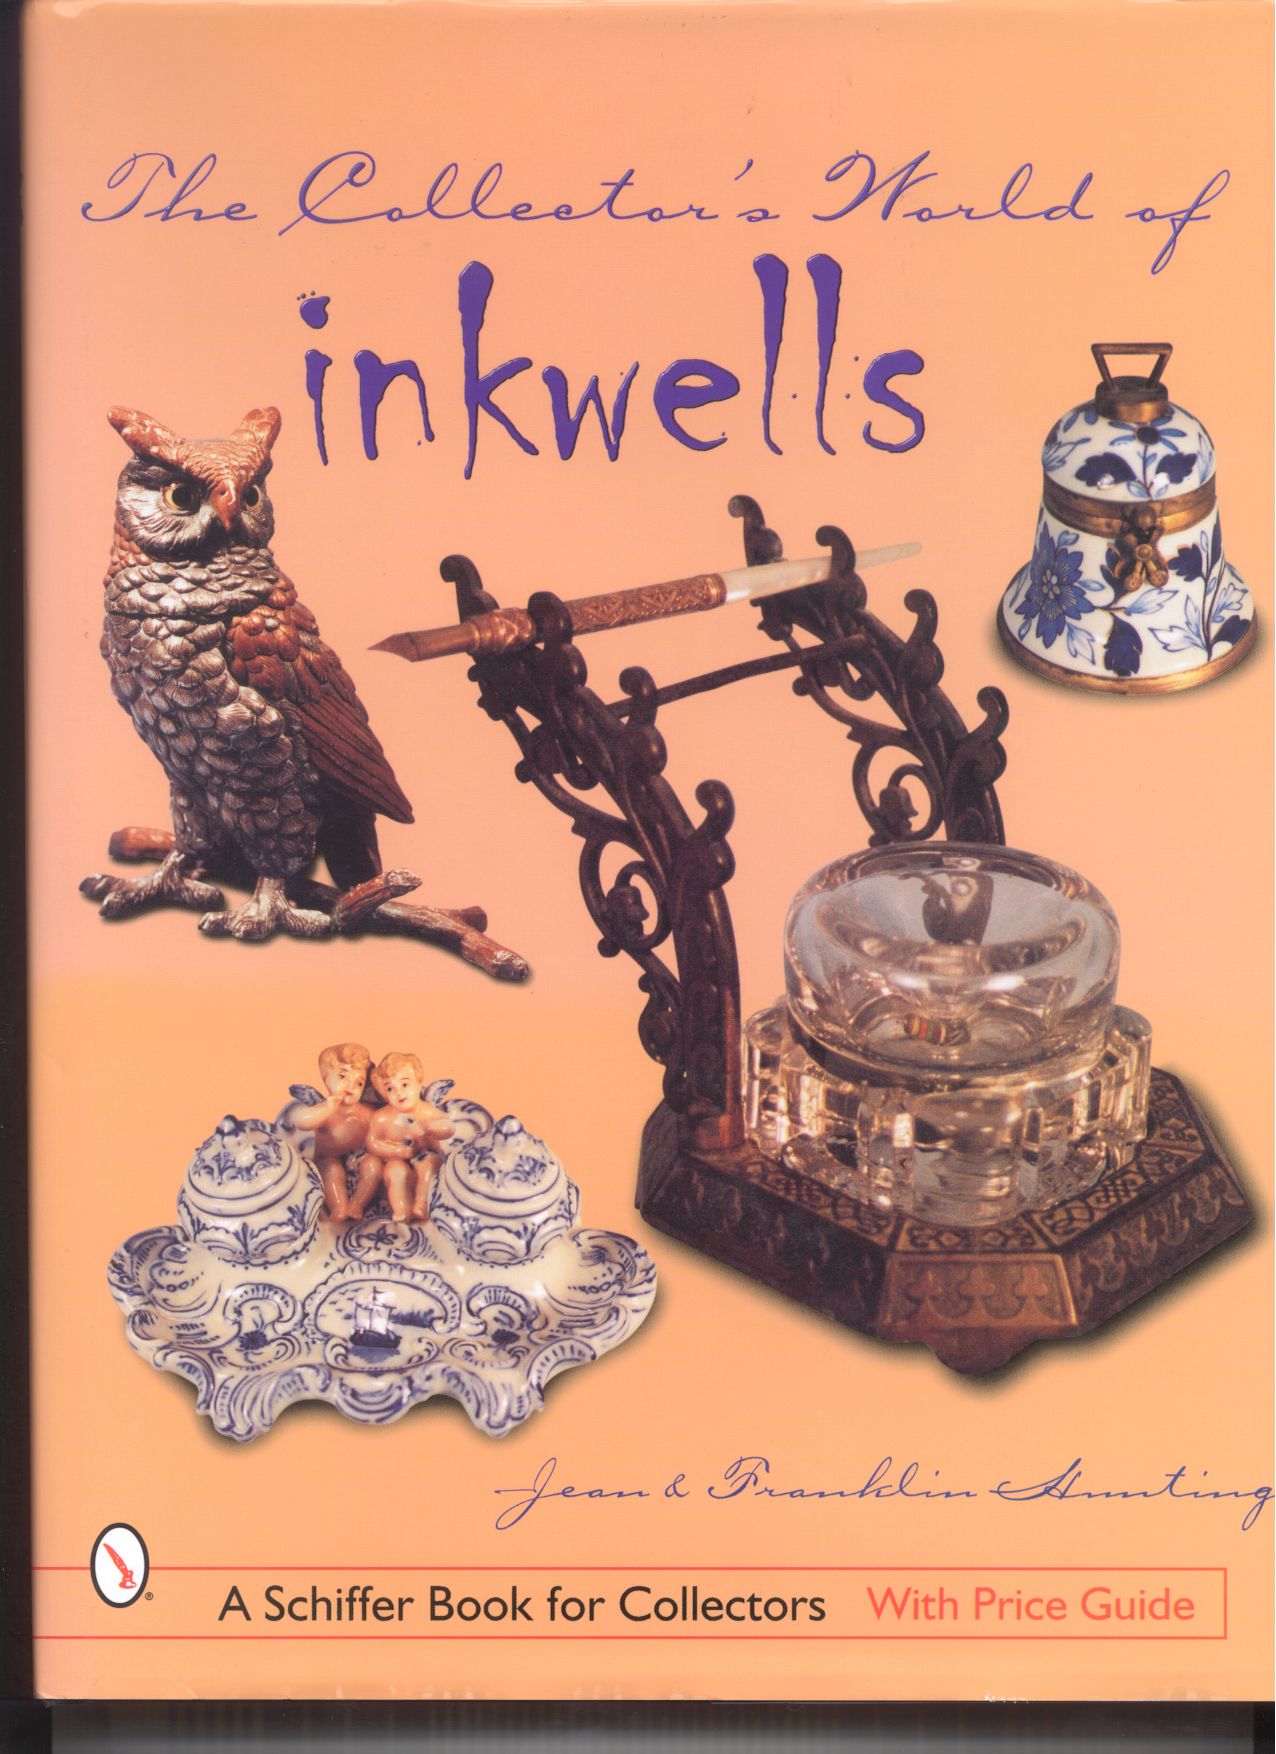 The Collectors' World of Inkwells - click to enlarge.